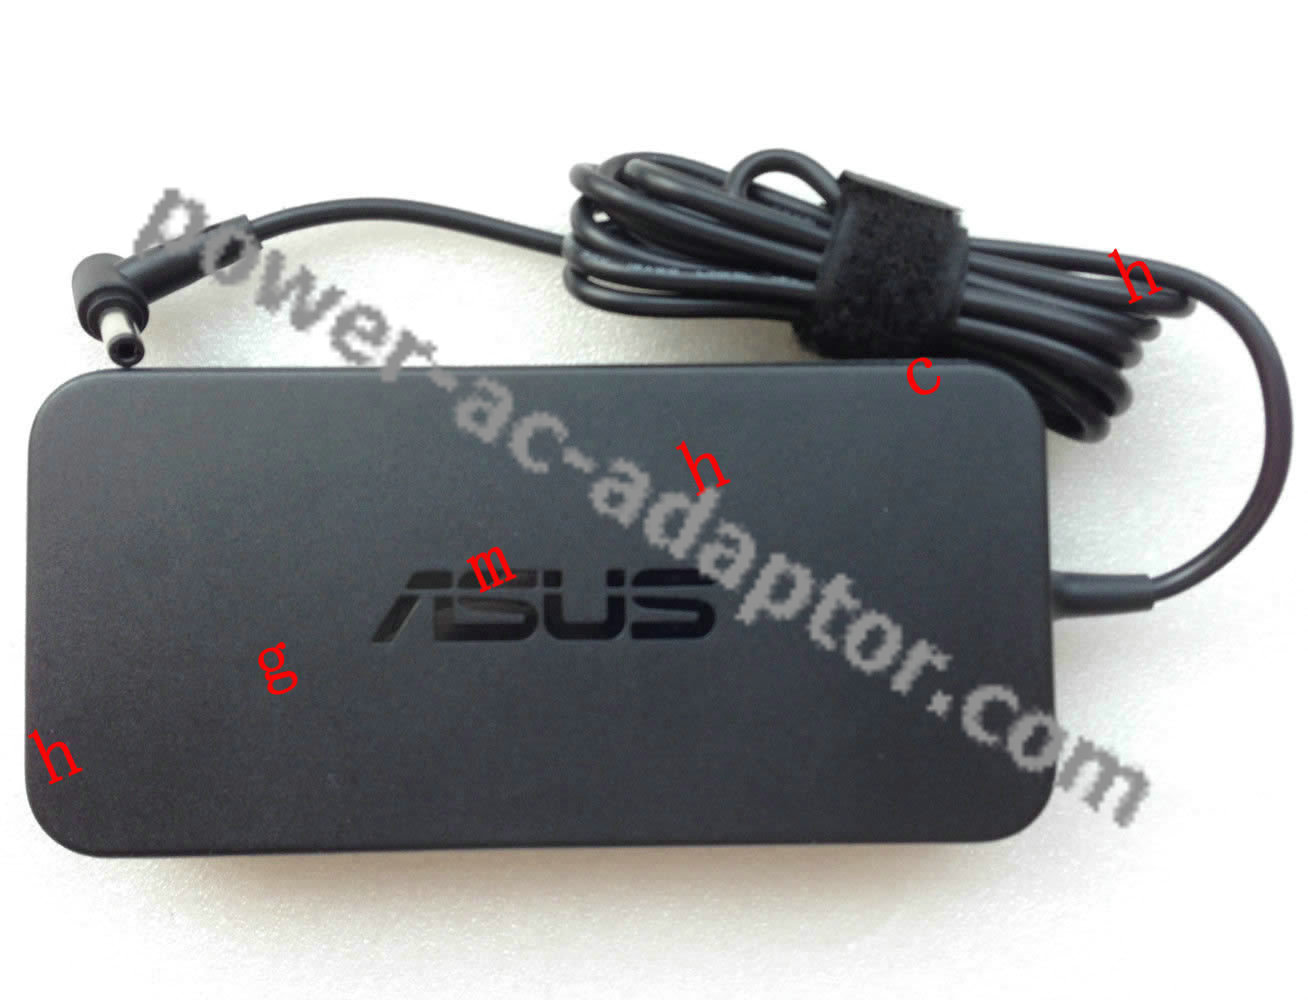 OEM Asus 120W AC Power Adapter Cord for G51Jx 3D Gaming